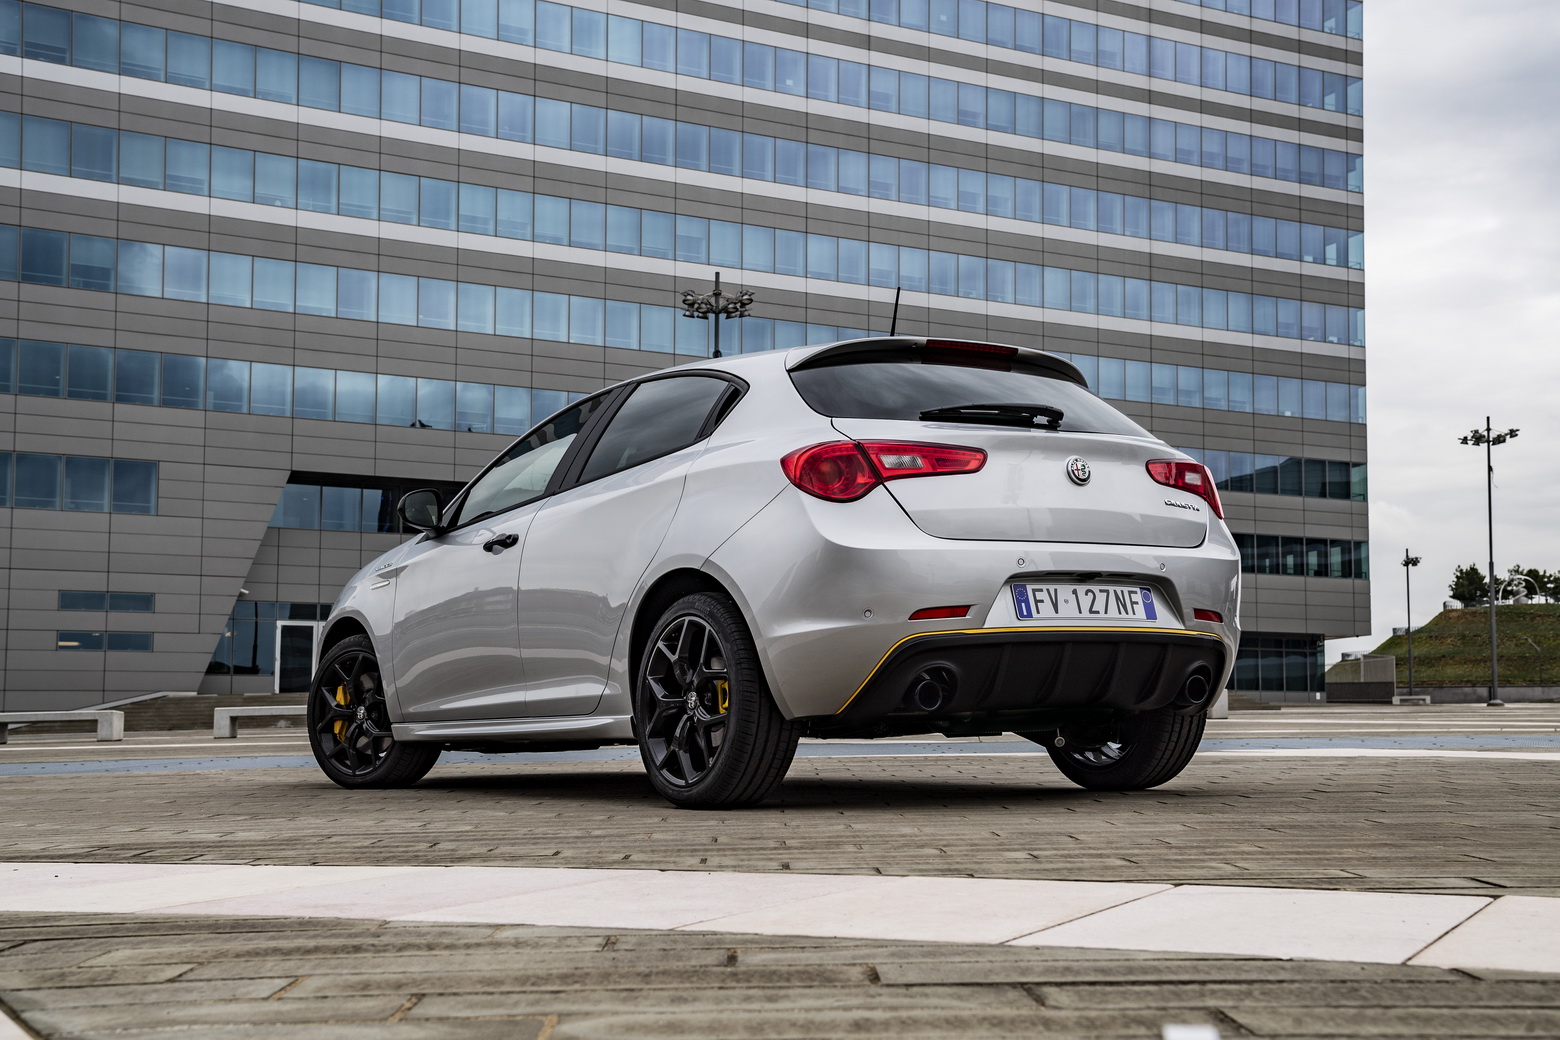 Alfa Romeo Giulietta To Bite The Dust By Year's End, Replaced By